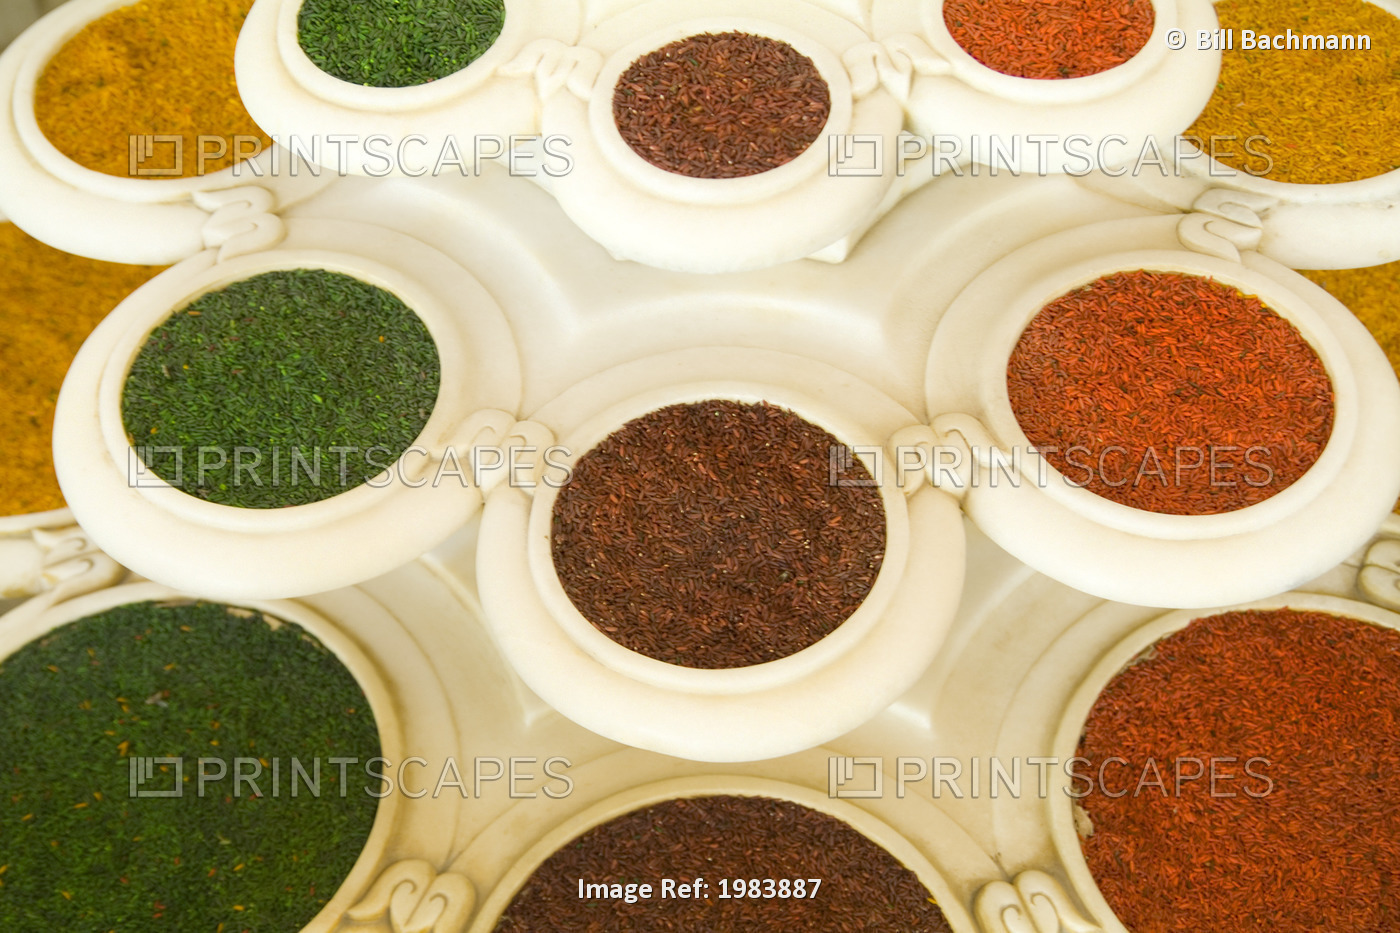 India, Agra, Abstract Colorful Bowls Of Spices In Vases From Above.